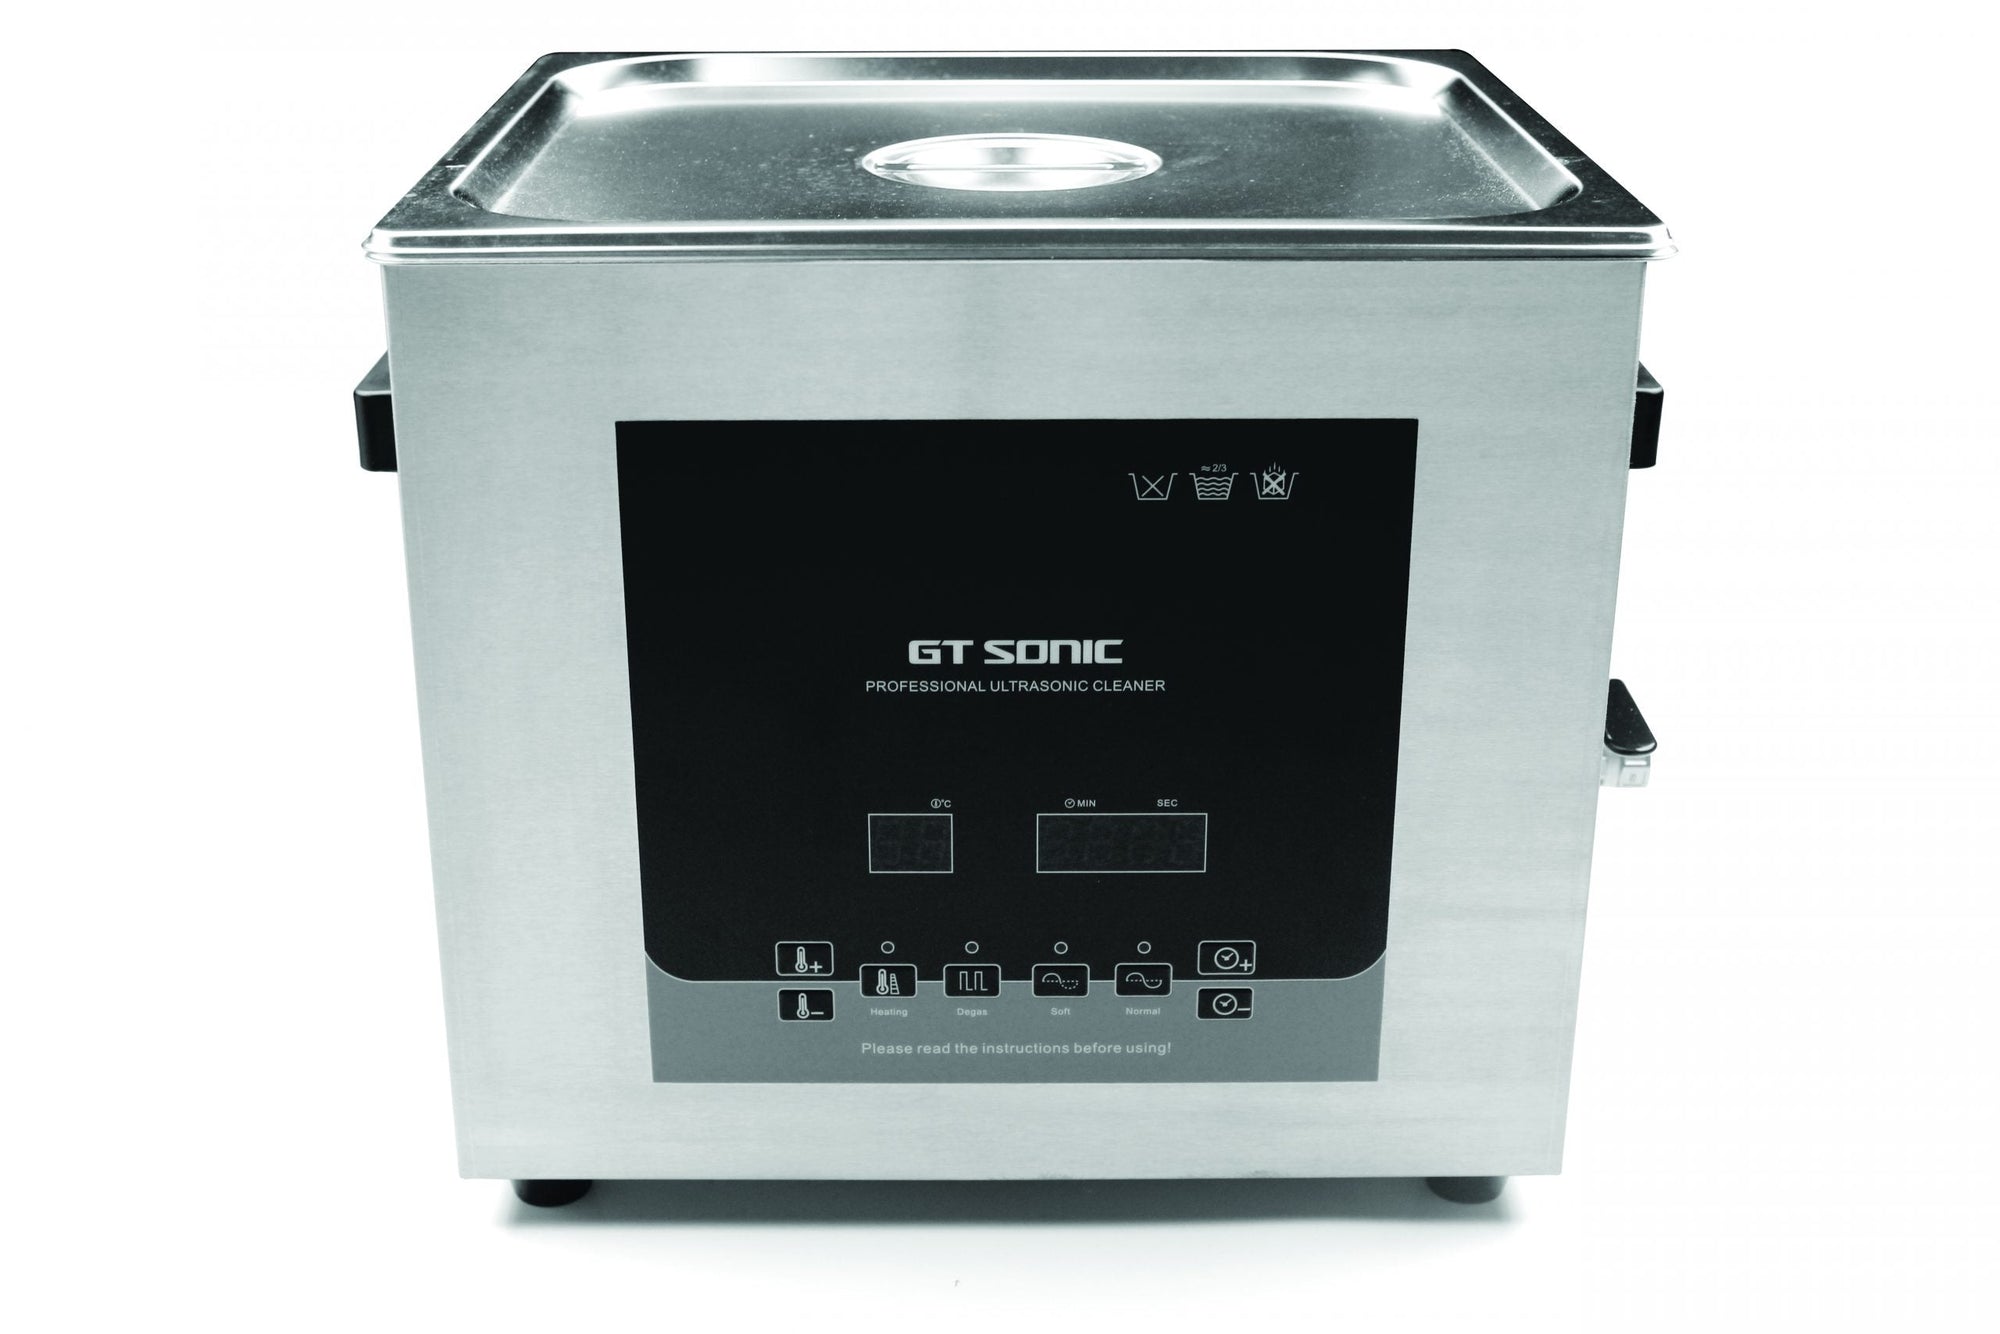 Our 13L ultrasonic cleaners are quiet with variable rinse times, temperatures, stainless steel finish and a clear digital display they are fitting for any modern clinic.